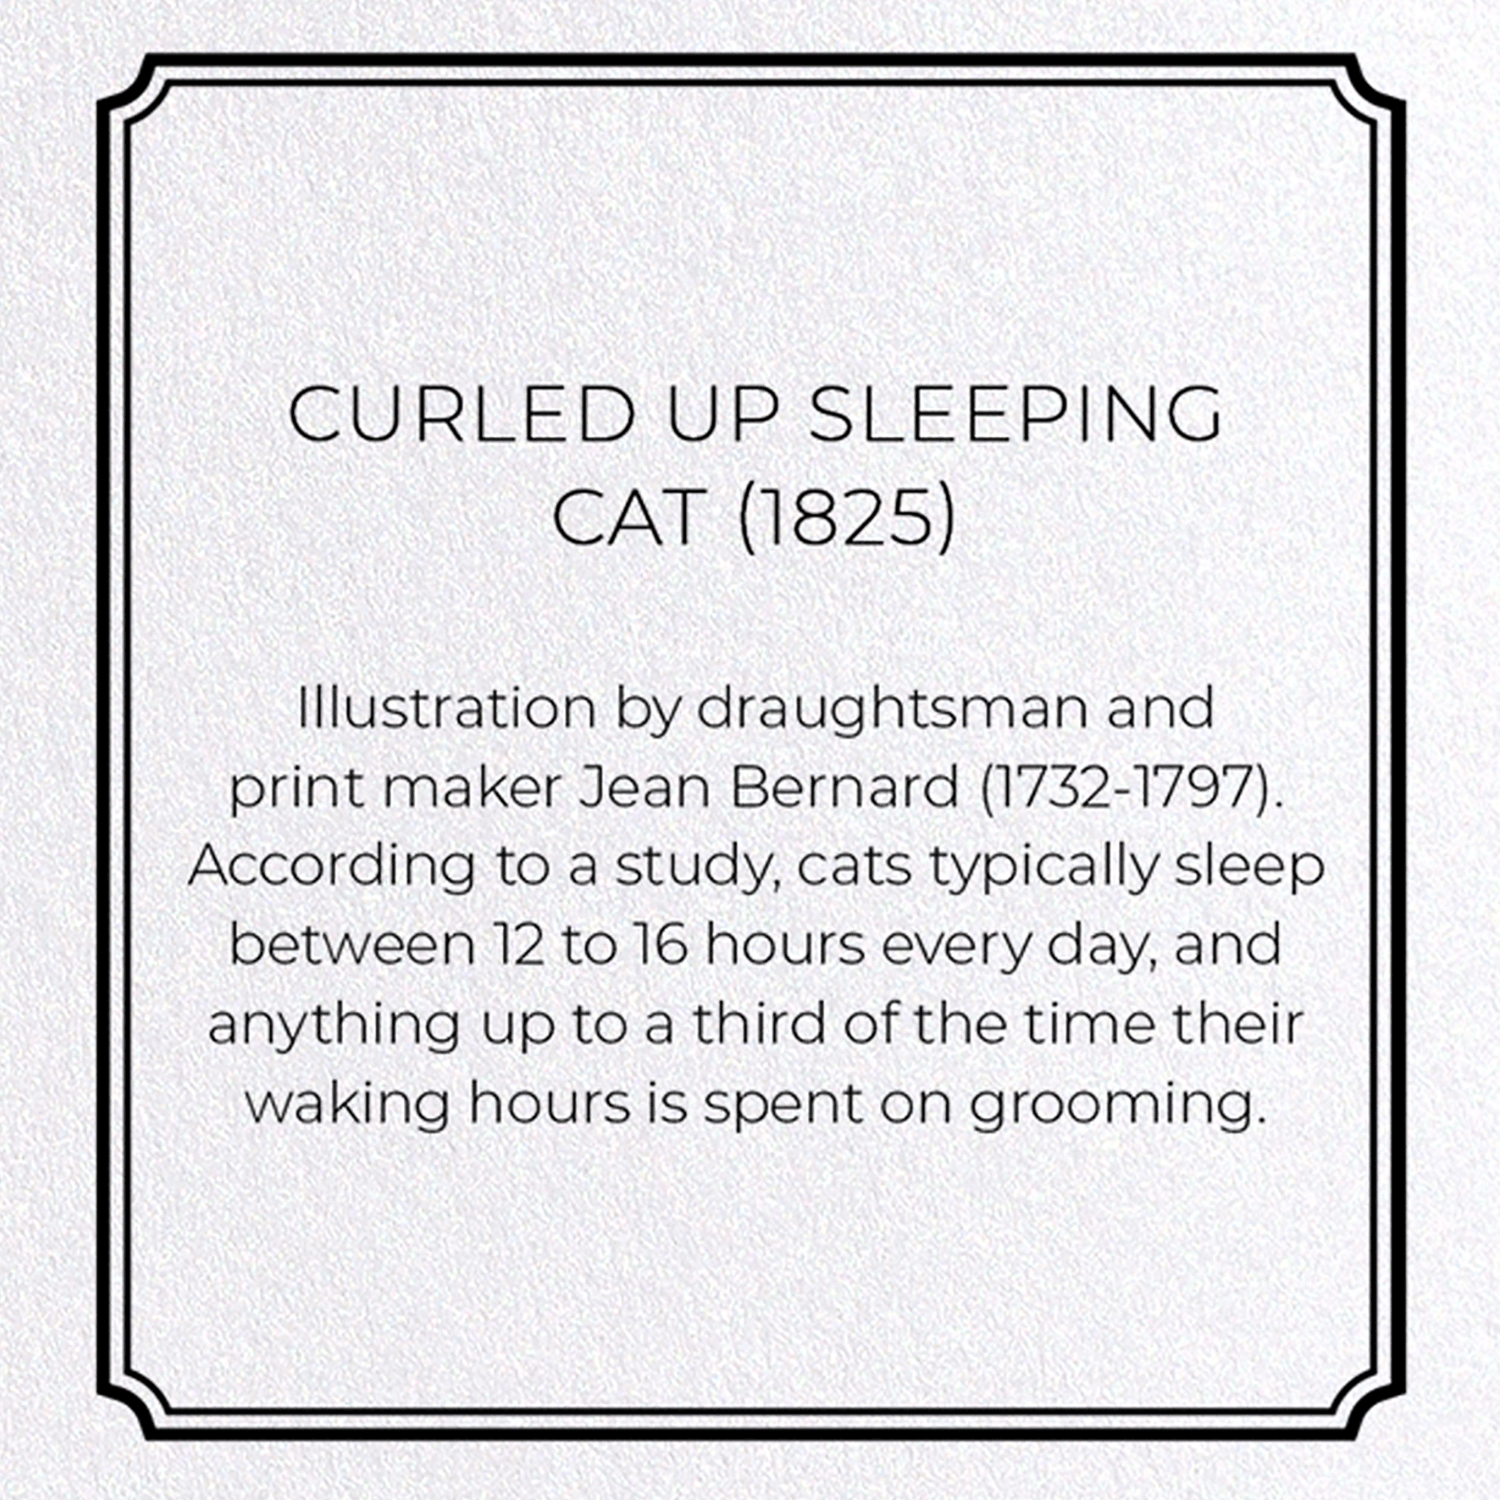 CURLED UP SLEEPING CAT (1825)